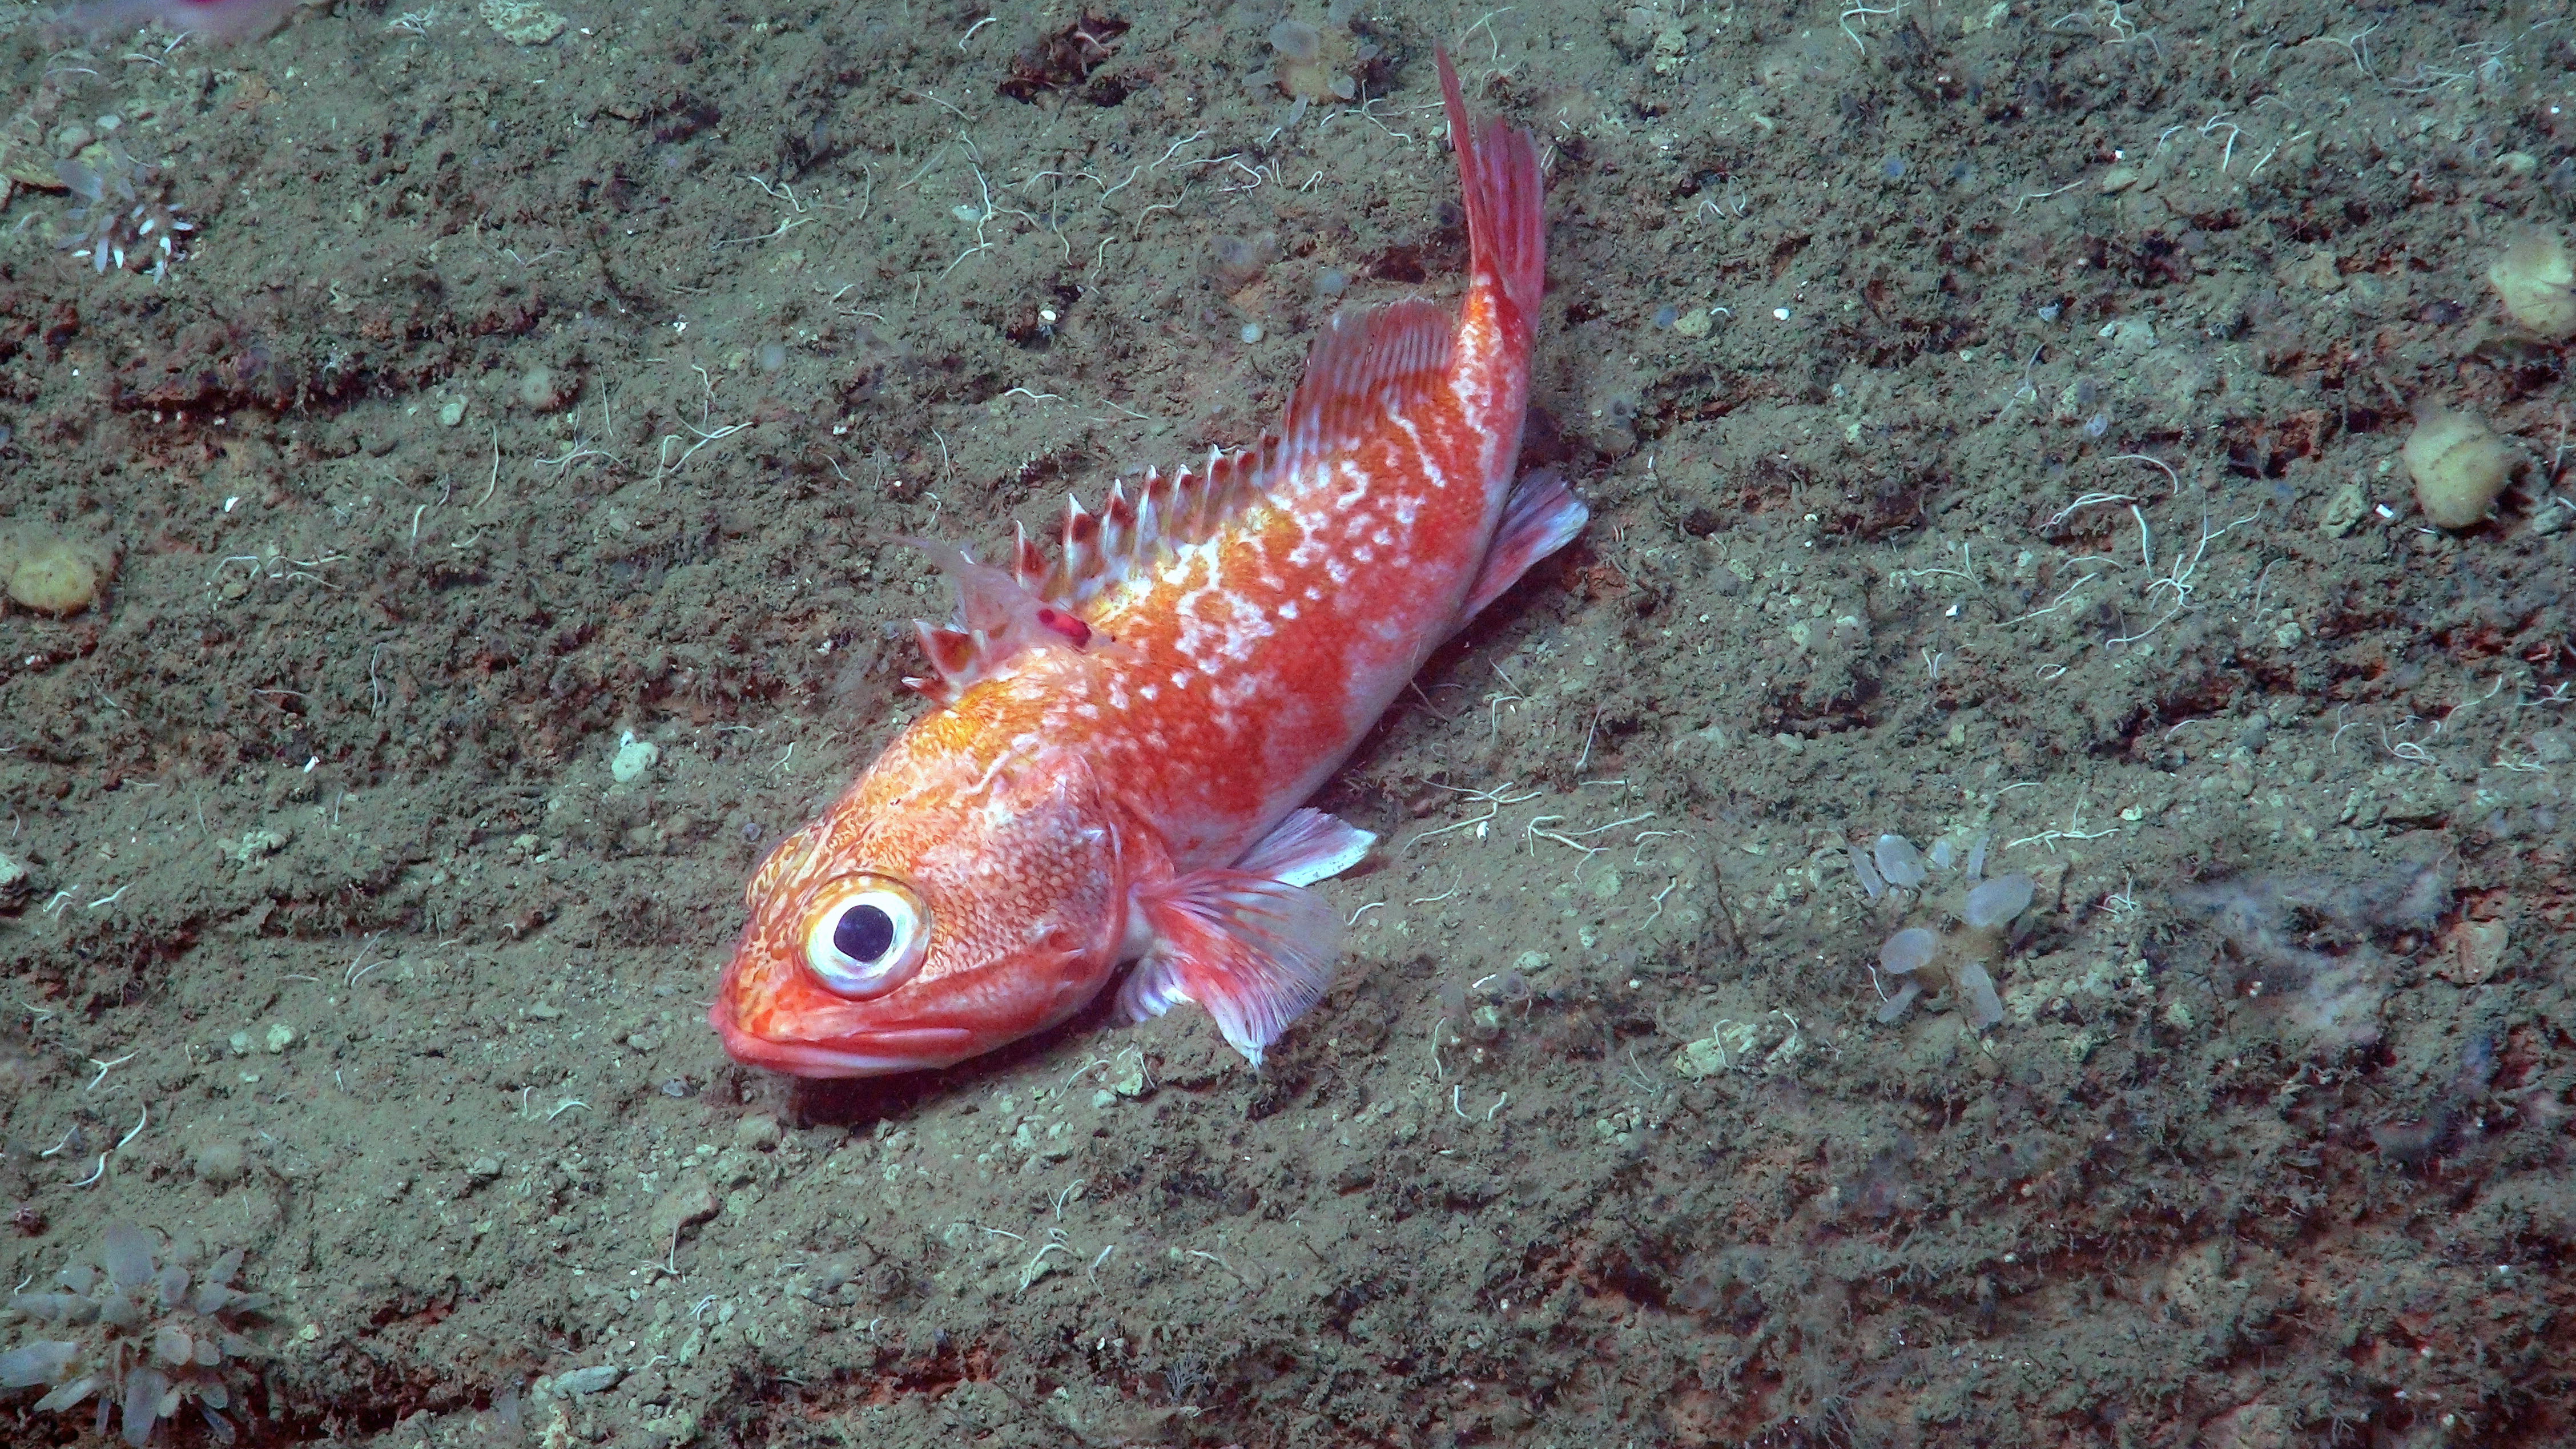 This blackbelly rosefish in Norfolk Canyon is as deadly as it is beautiful. It’s an ambush hunter with poisonous spines.